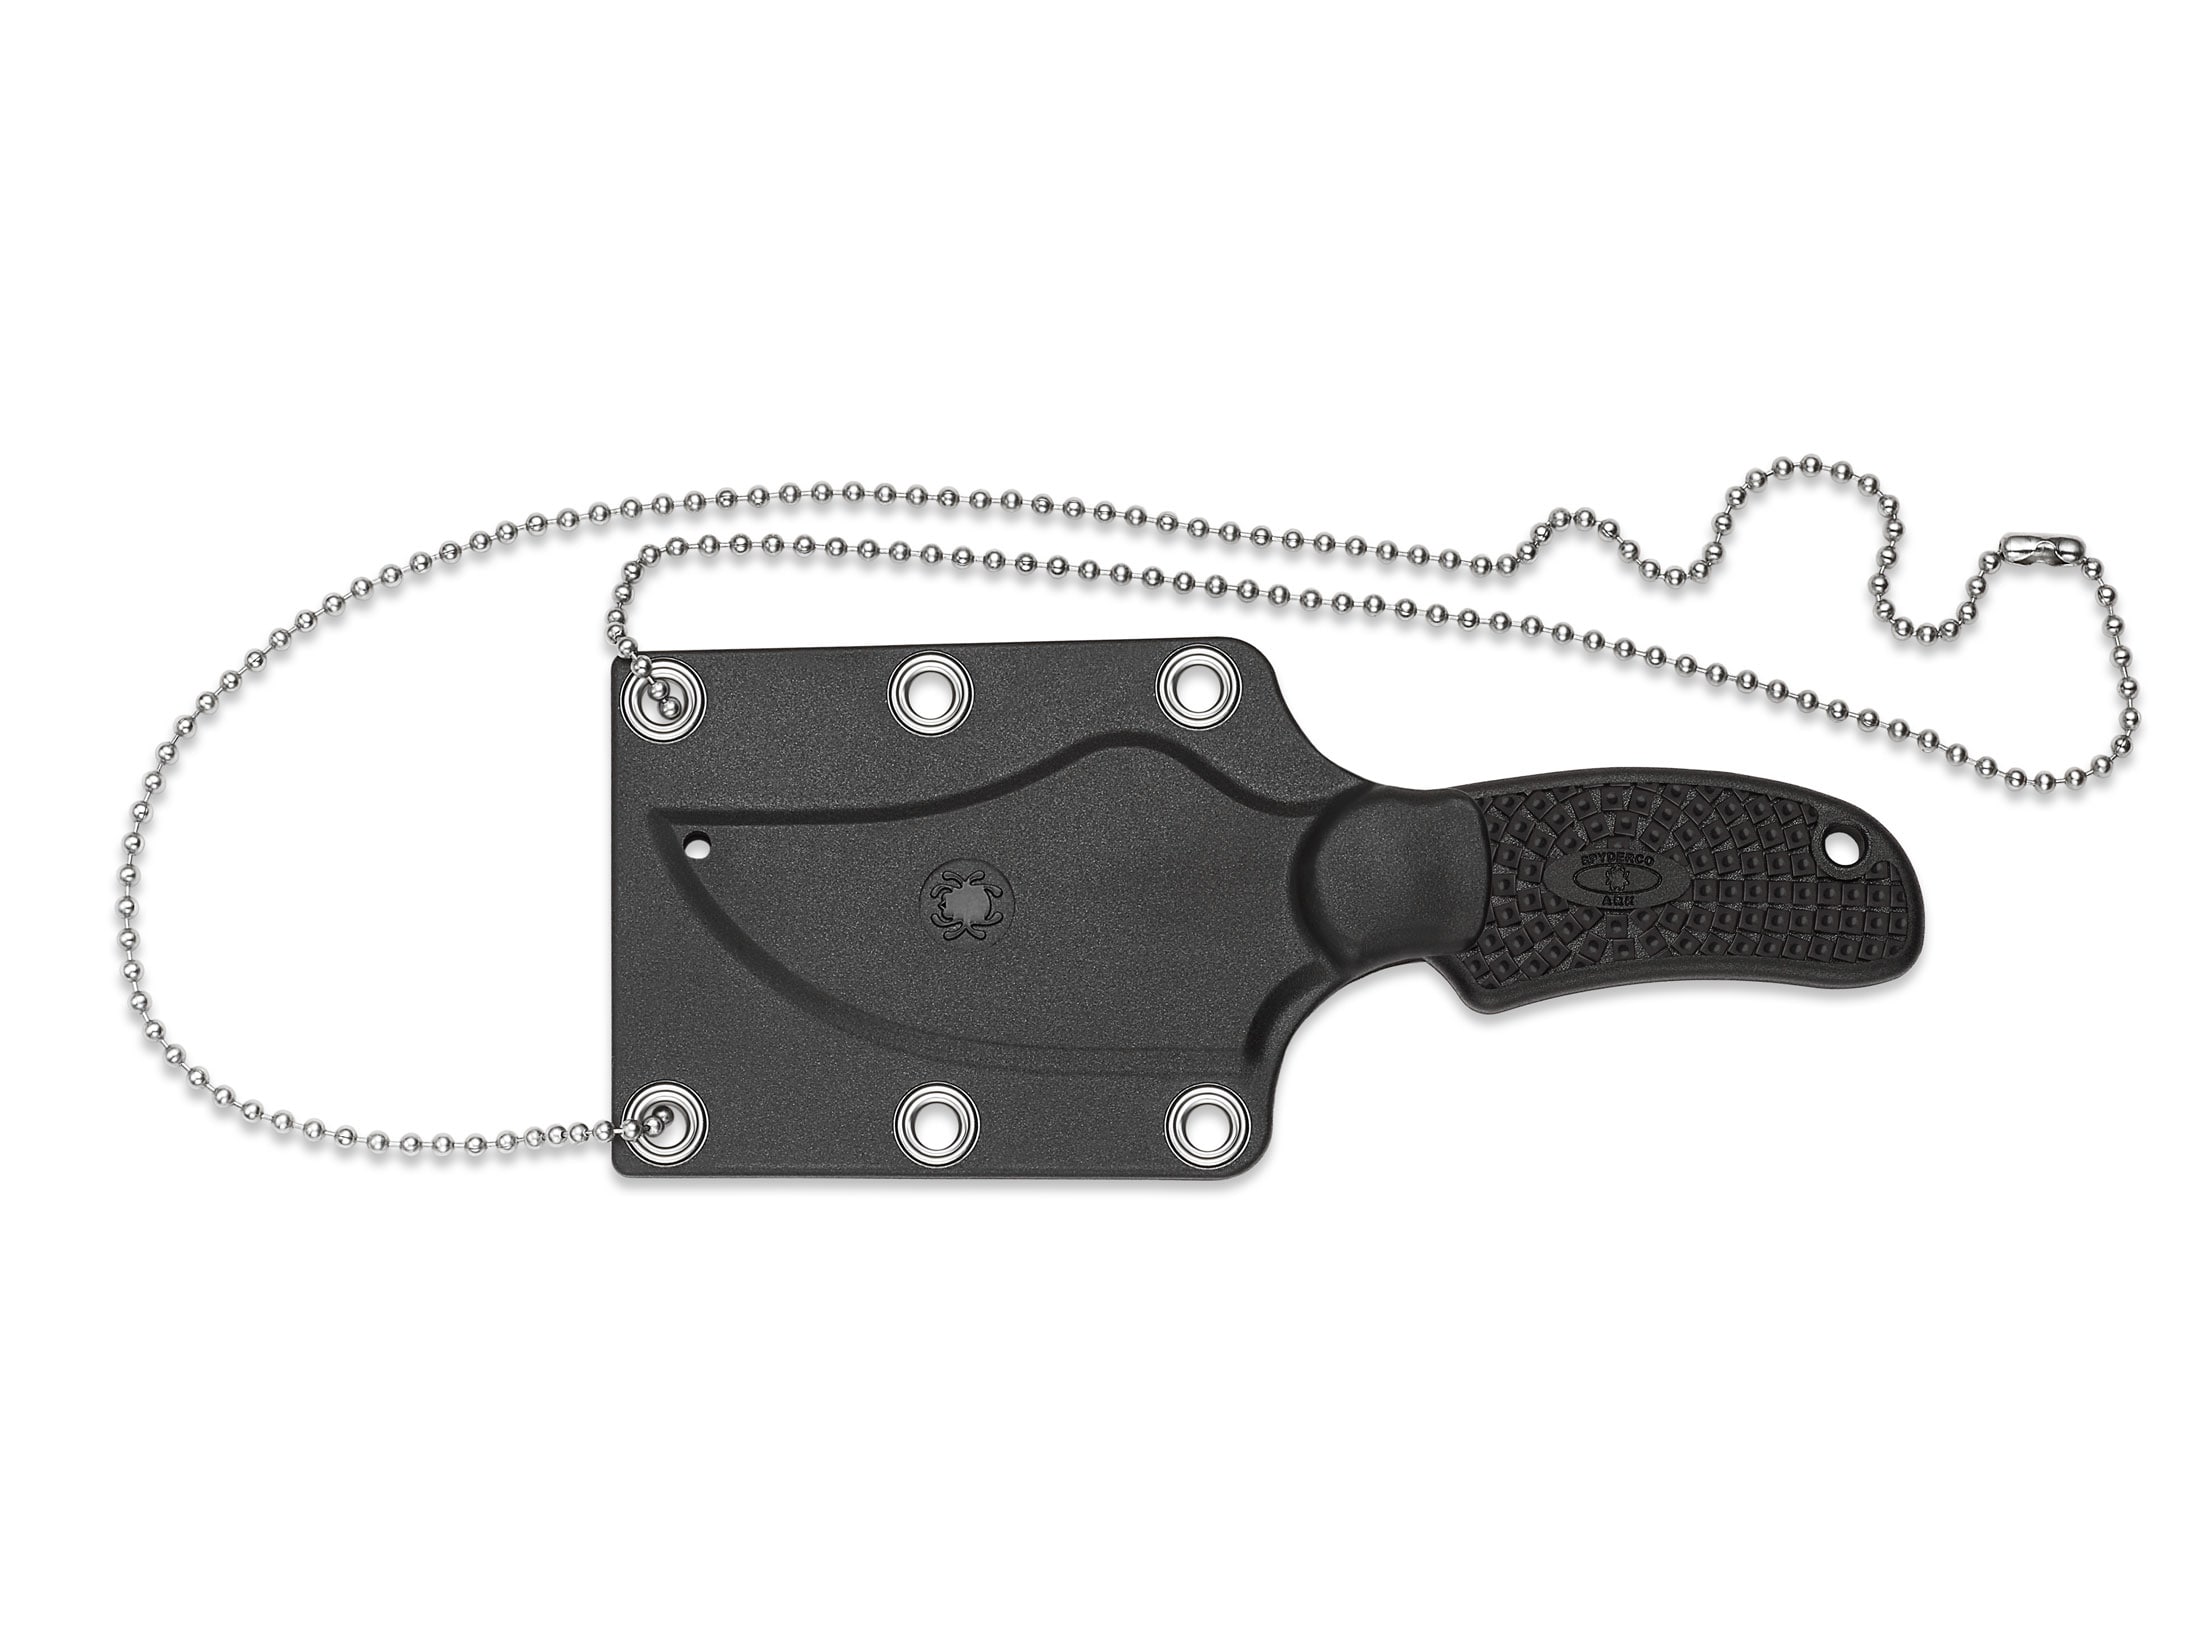 Spyderco ARK Fixed Blade Knife 2.5″ Clip Point H-1 Steel Blade FRN Handle Black For Sale